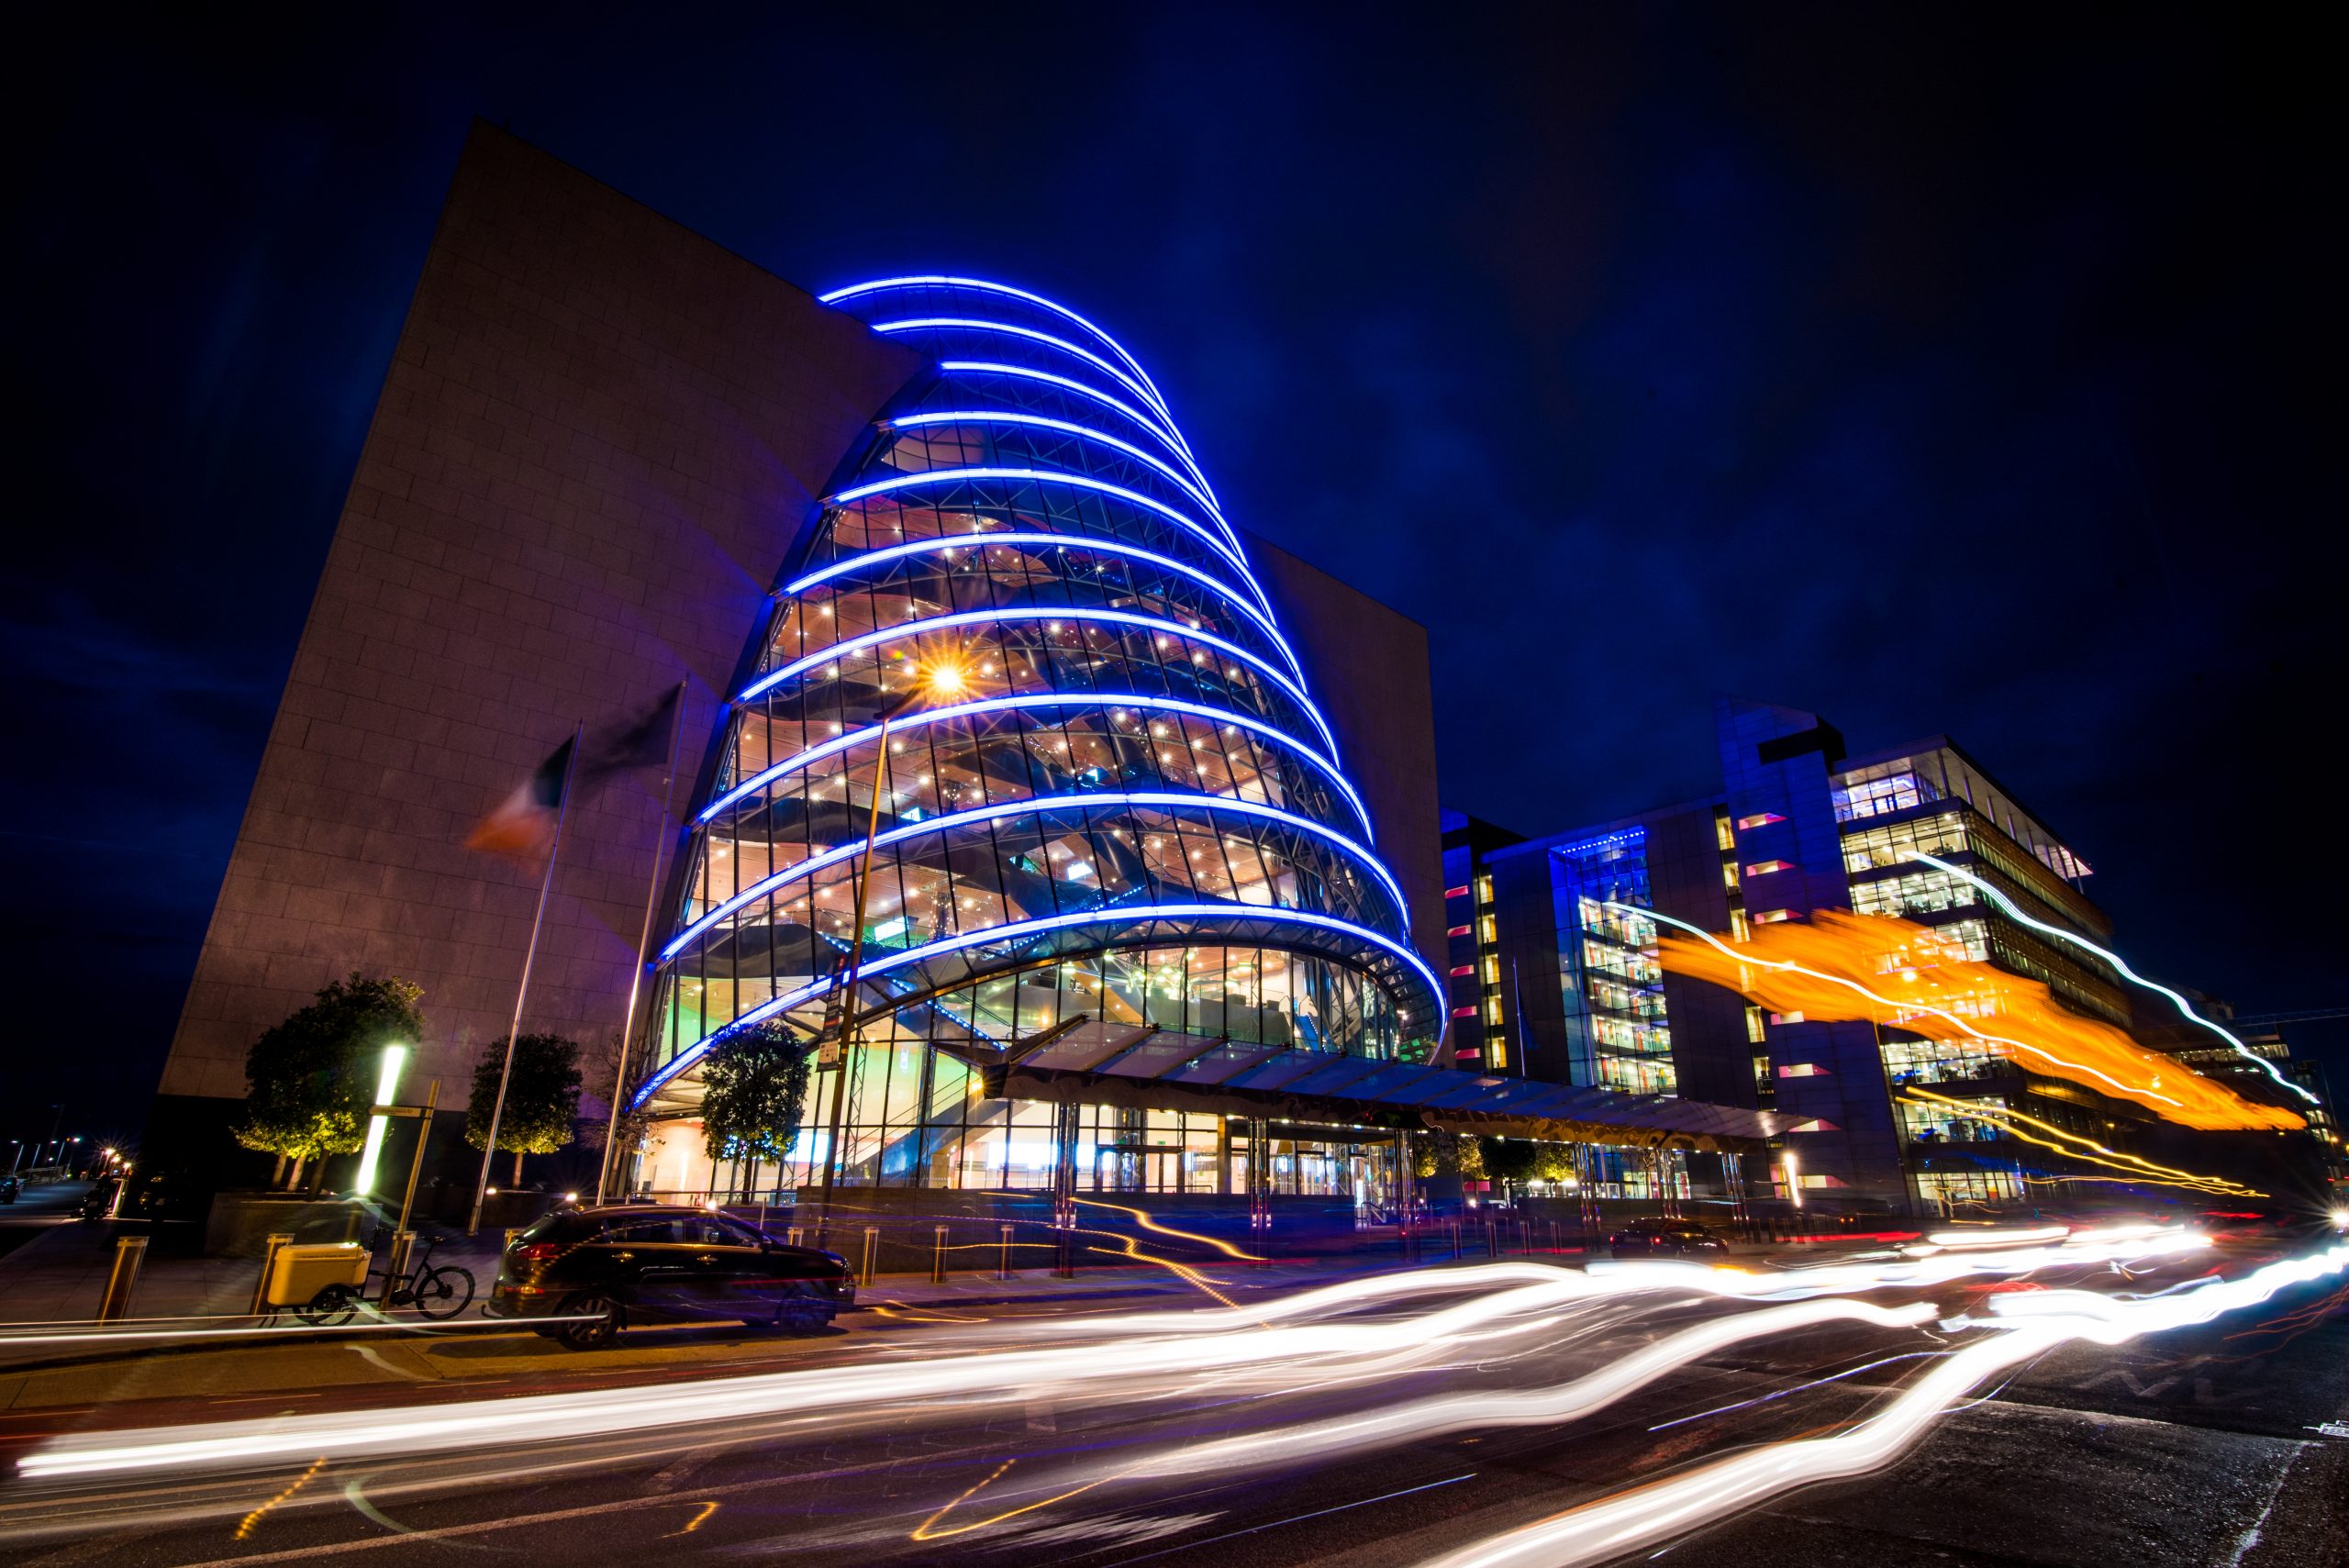 Convention Centre Dublin by night